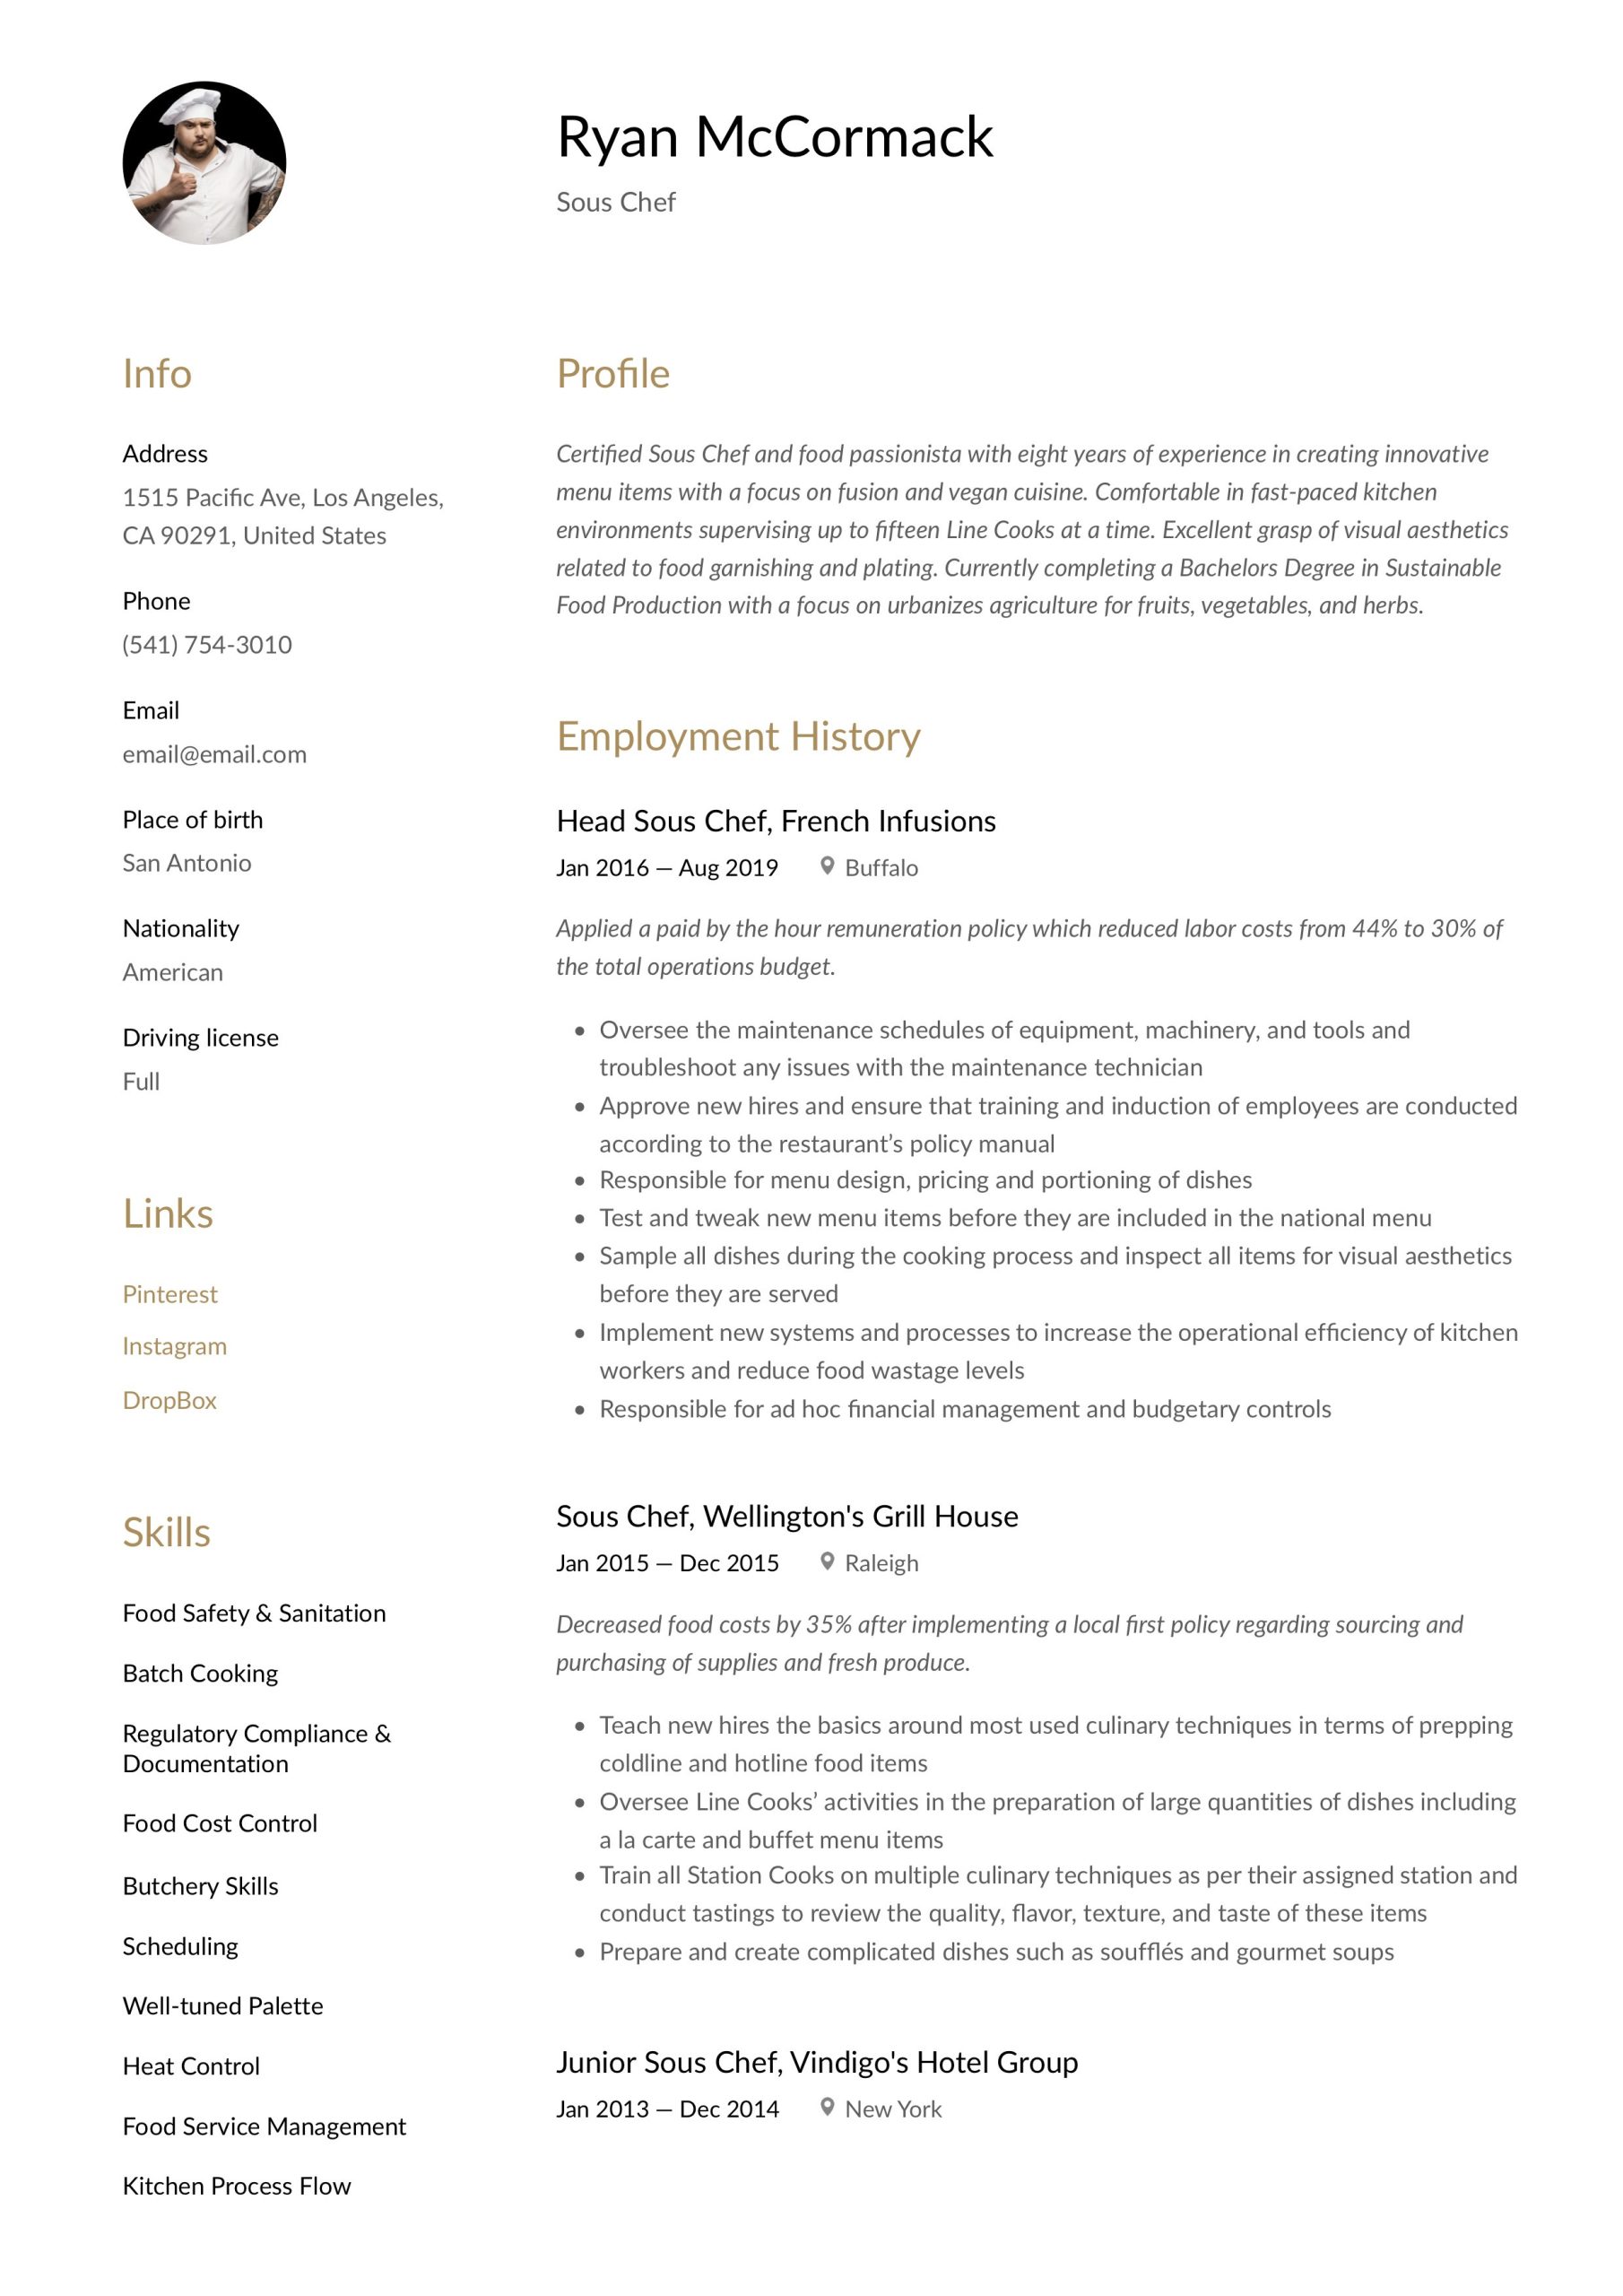 The Best Resume Sample Of sous Chef sous Chef Resume & Writing Guide  12 Resume Examples 2020